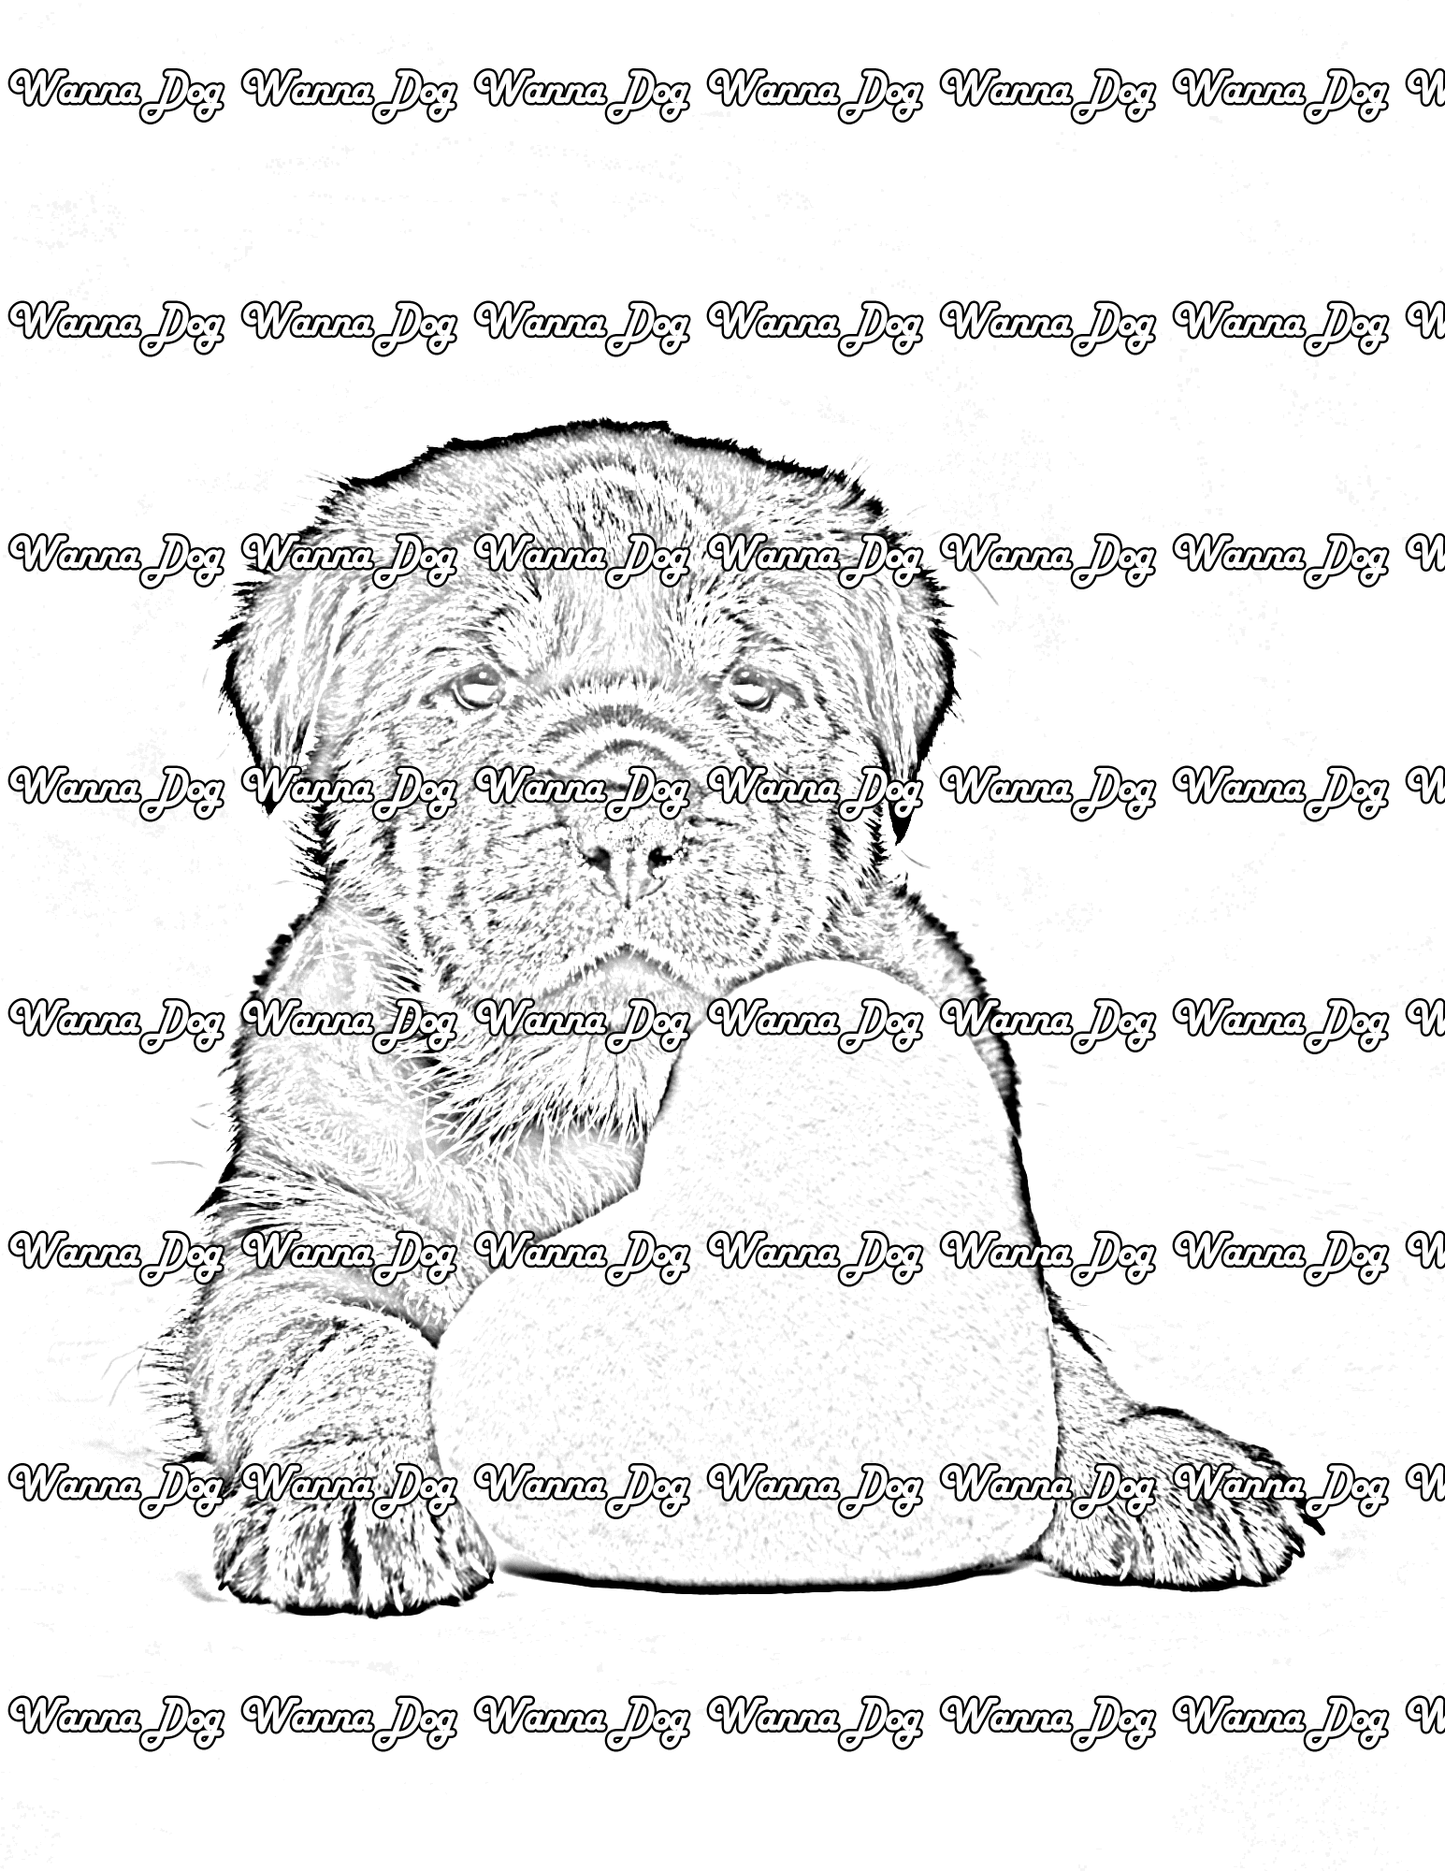 Rottweiler Puppy Coloring Page of a Rottweiler Puppy with a heart plush